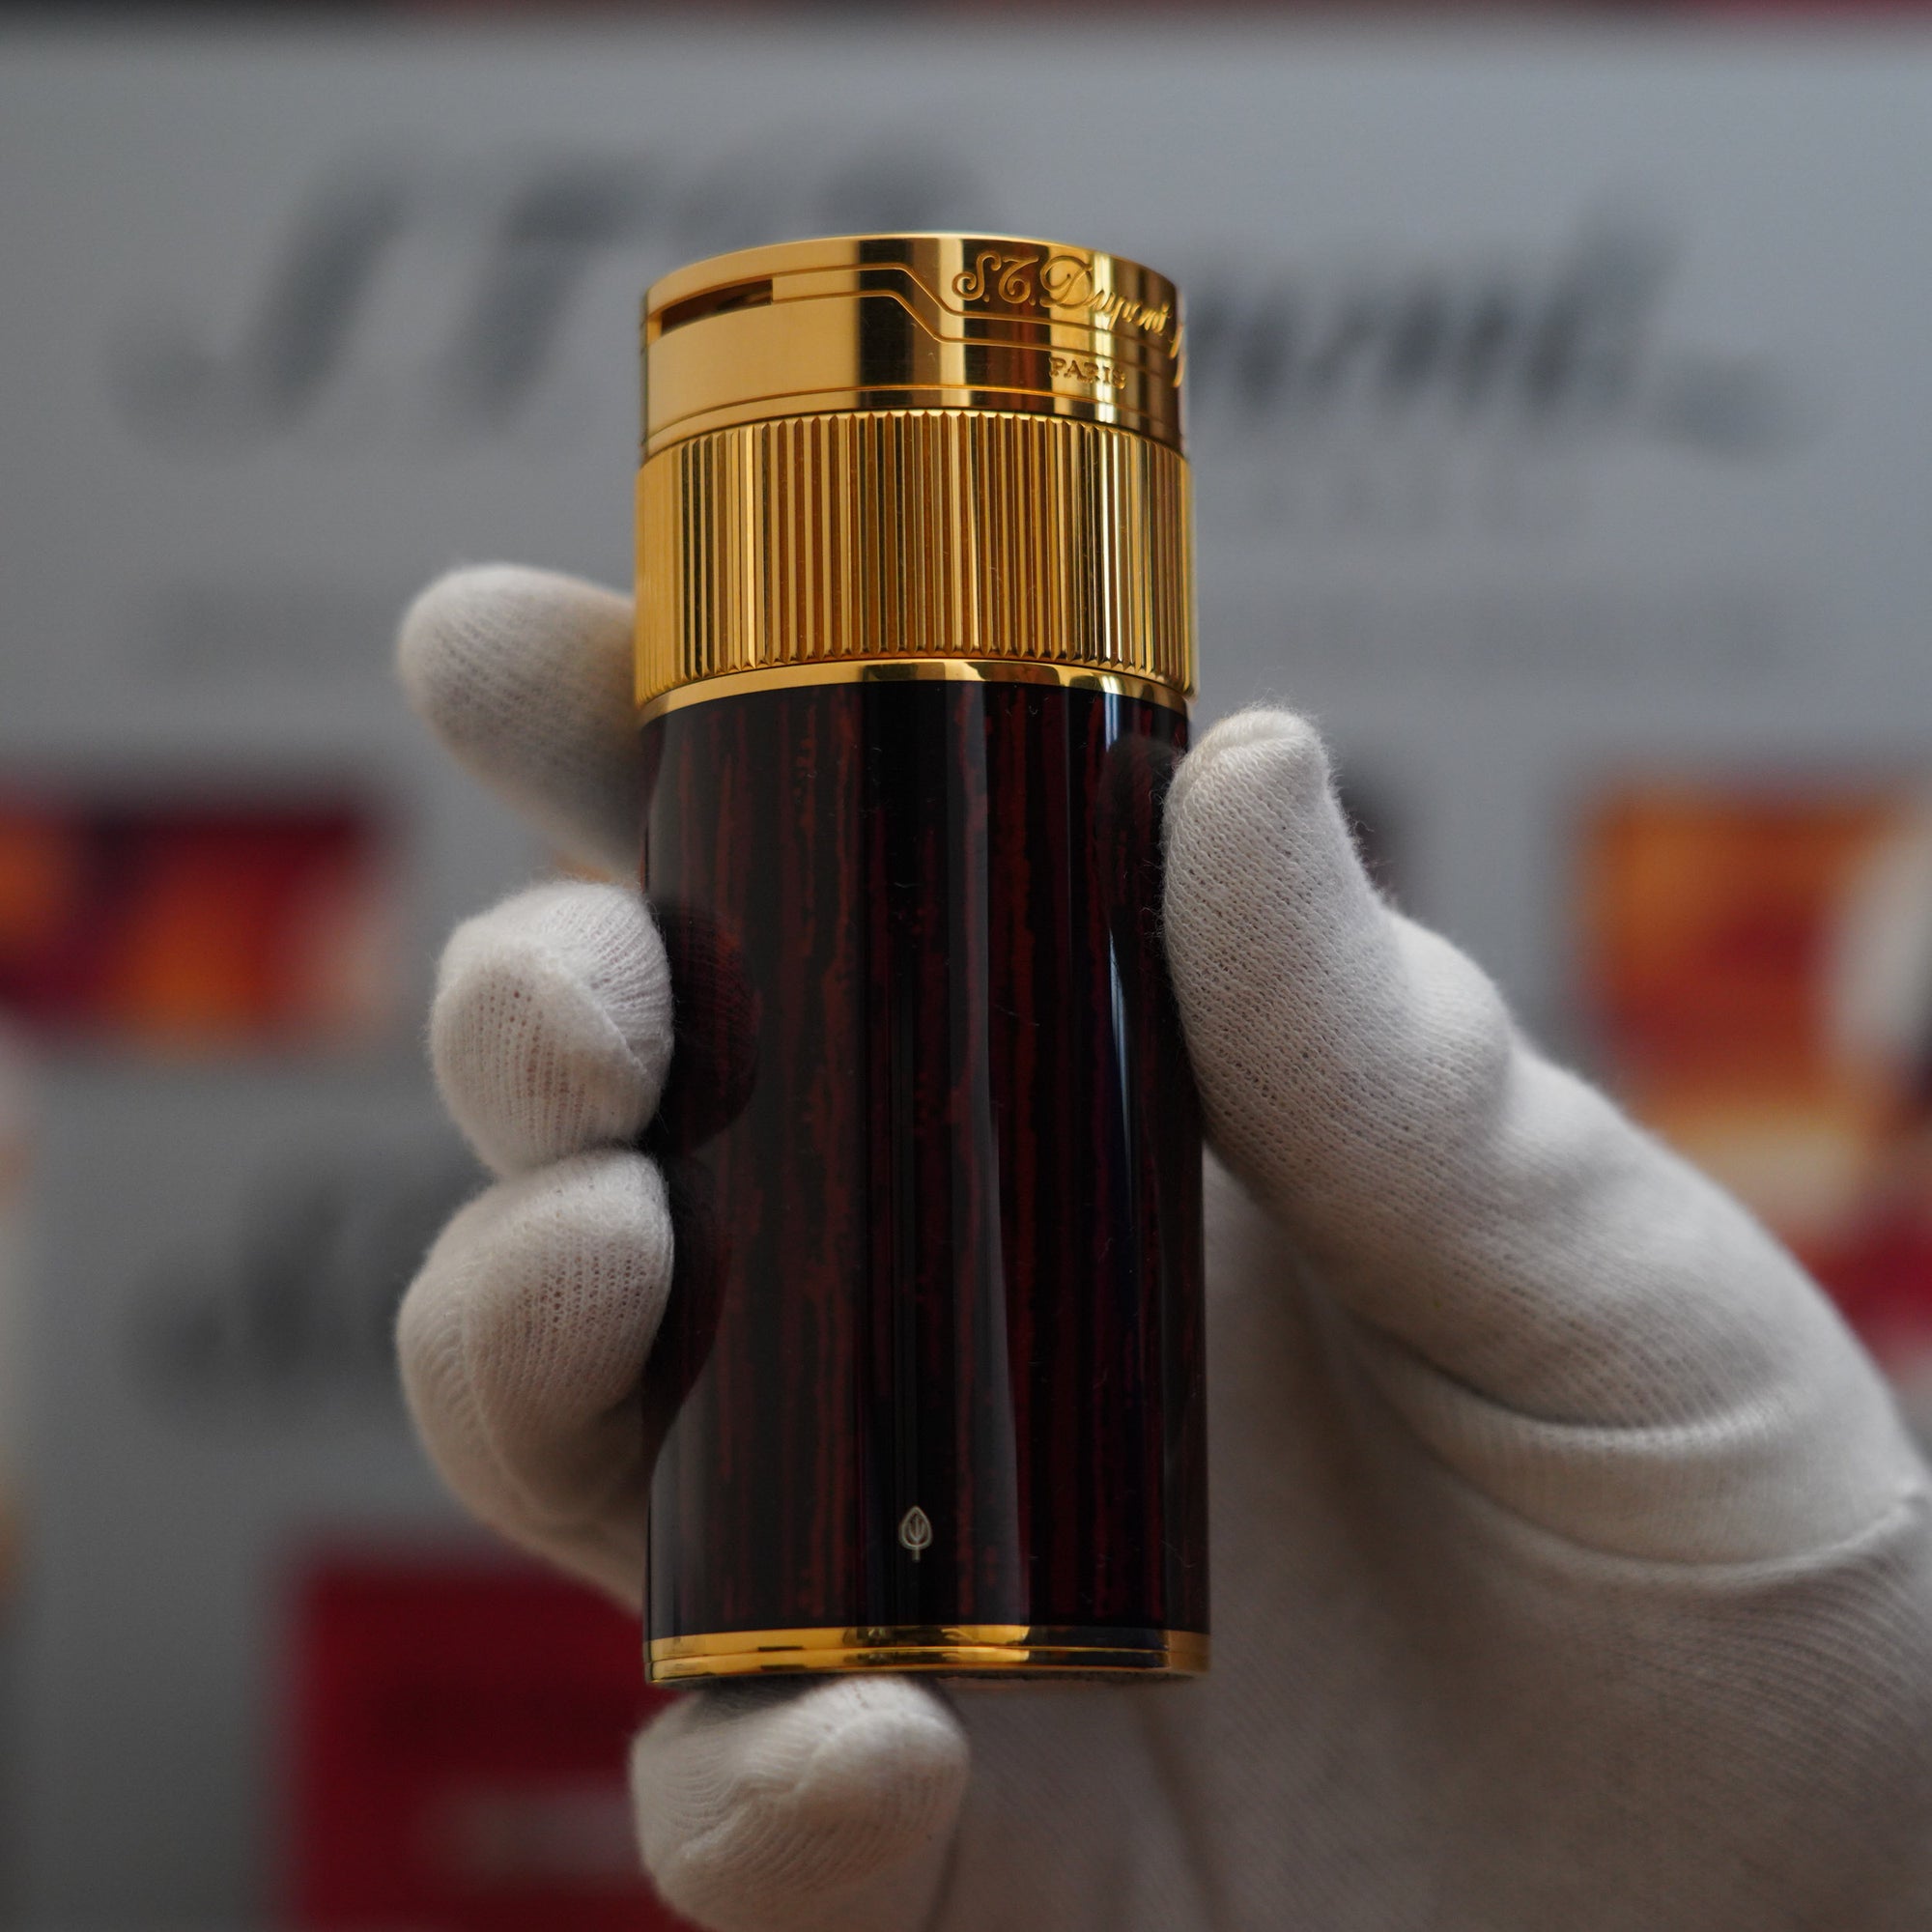 A person is holding up a vintage 1980 S.T. Dupont 18k Masterpiece Unique Cylinder Gold Plated Macassar Lacquer Dual Flame Table Lighter.